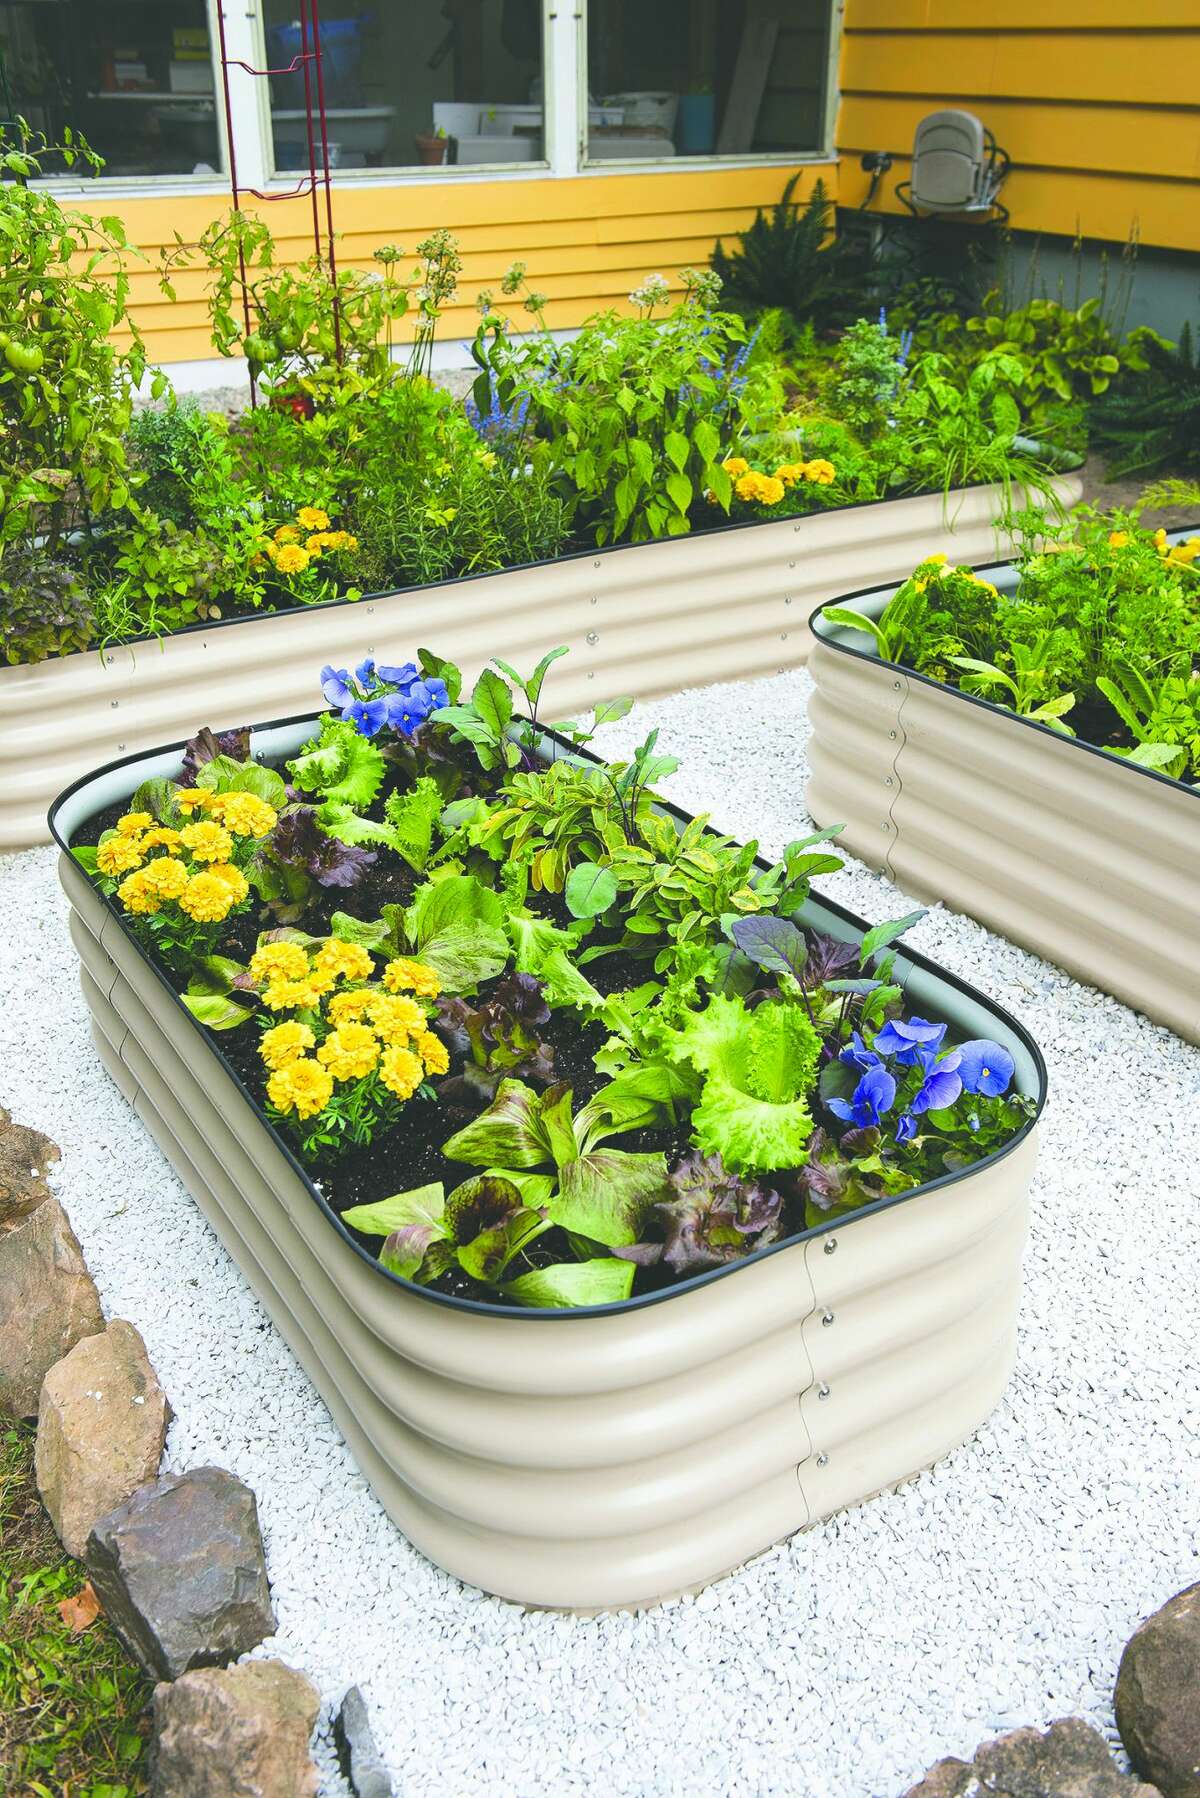 Some raised beds have built-in water reservoirs to extend the time between watering.